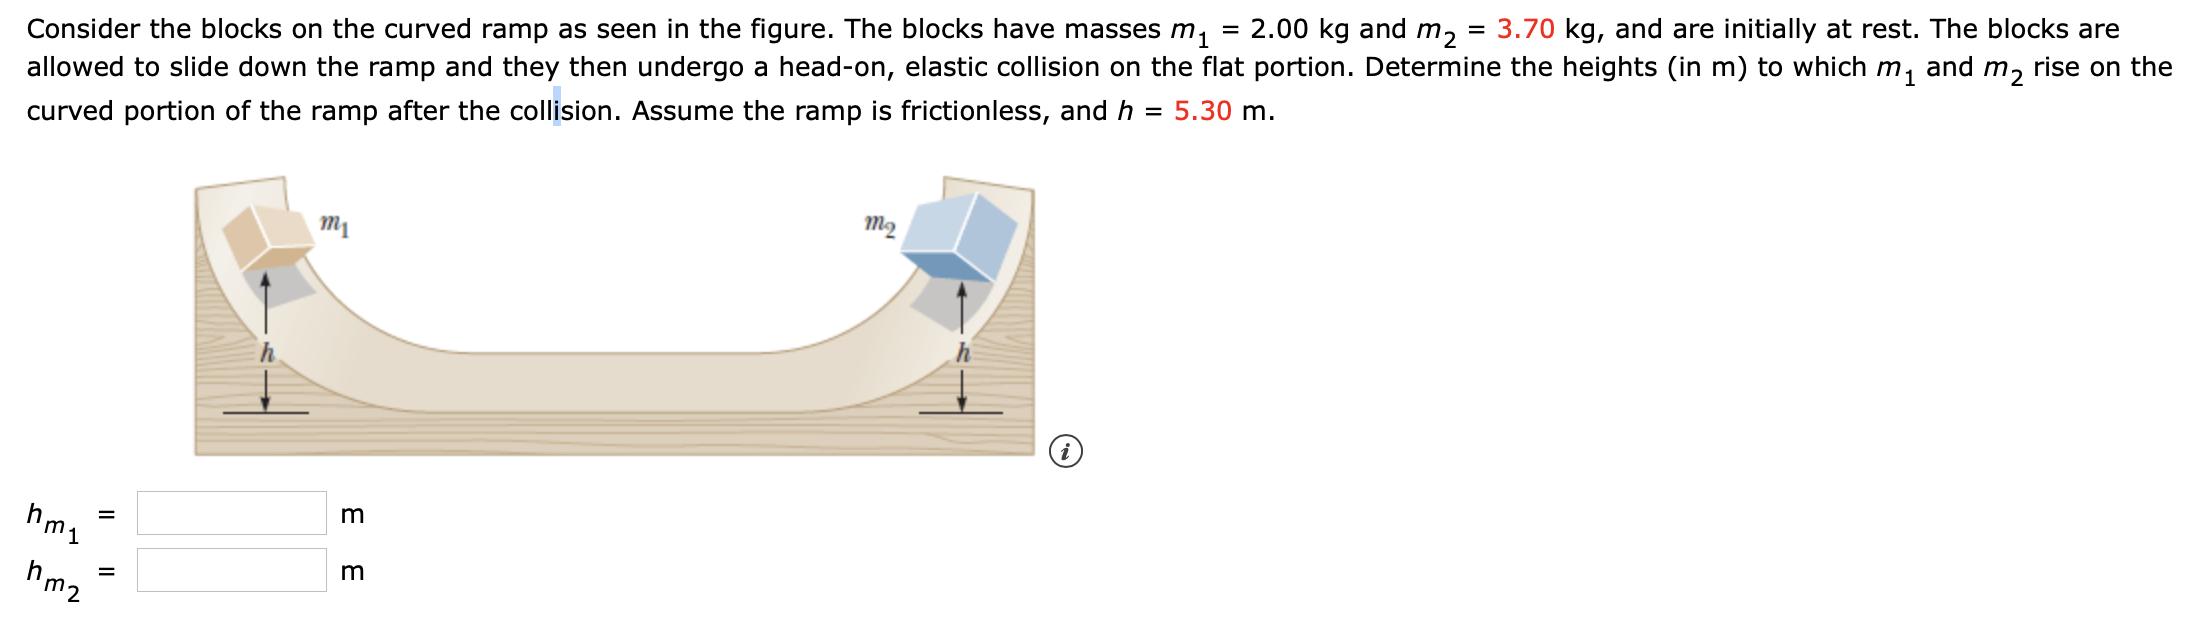 Consider the blocks on the curved ramp as seen in the figure. The blocks have masses m = 2.00 kg and m = 3.70